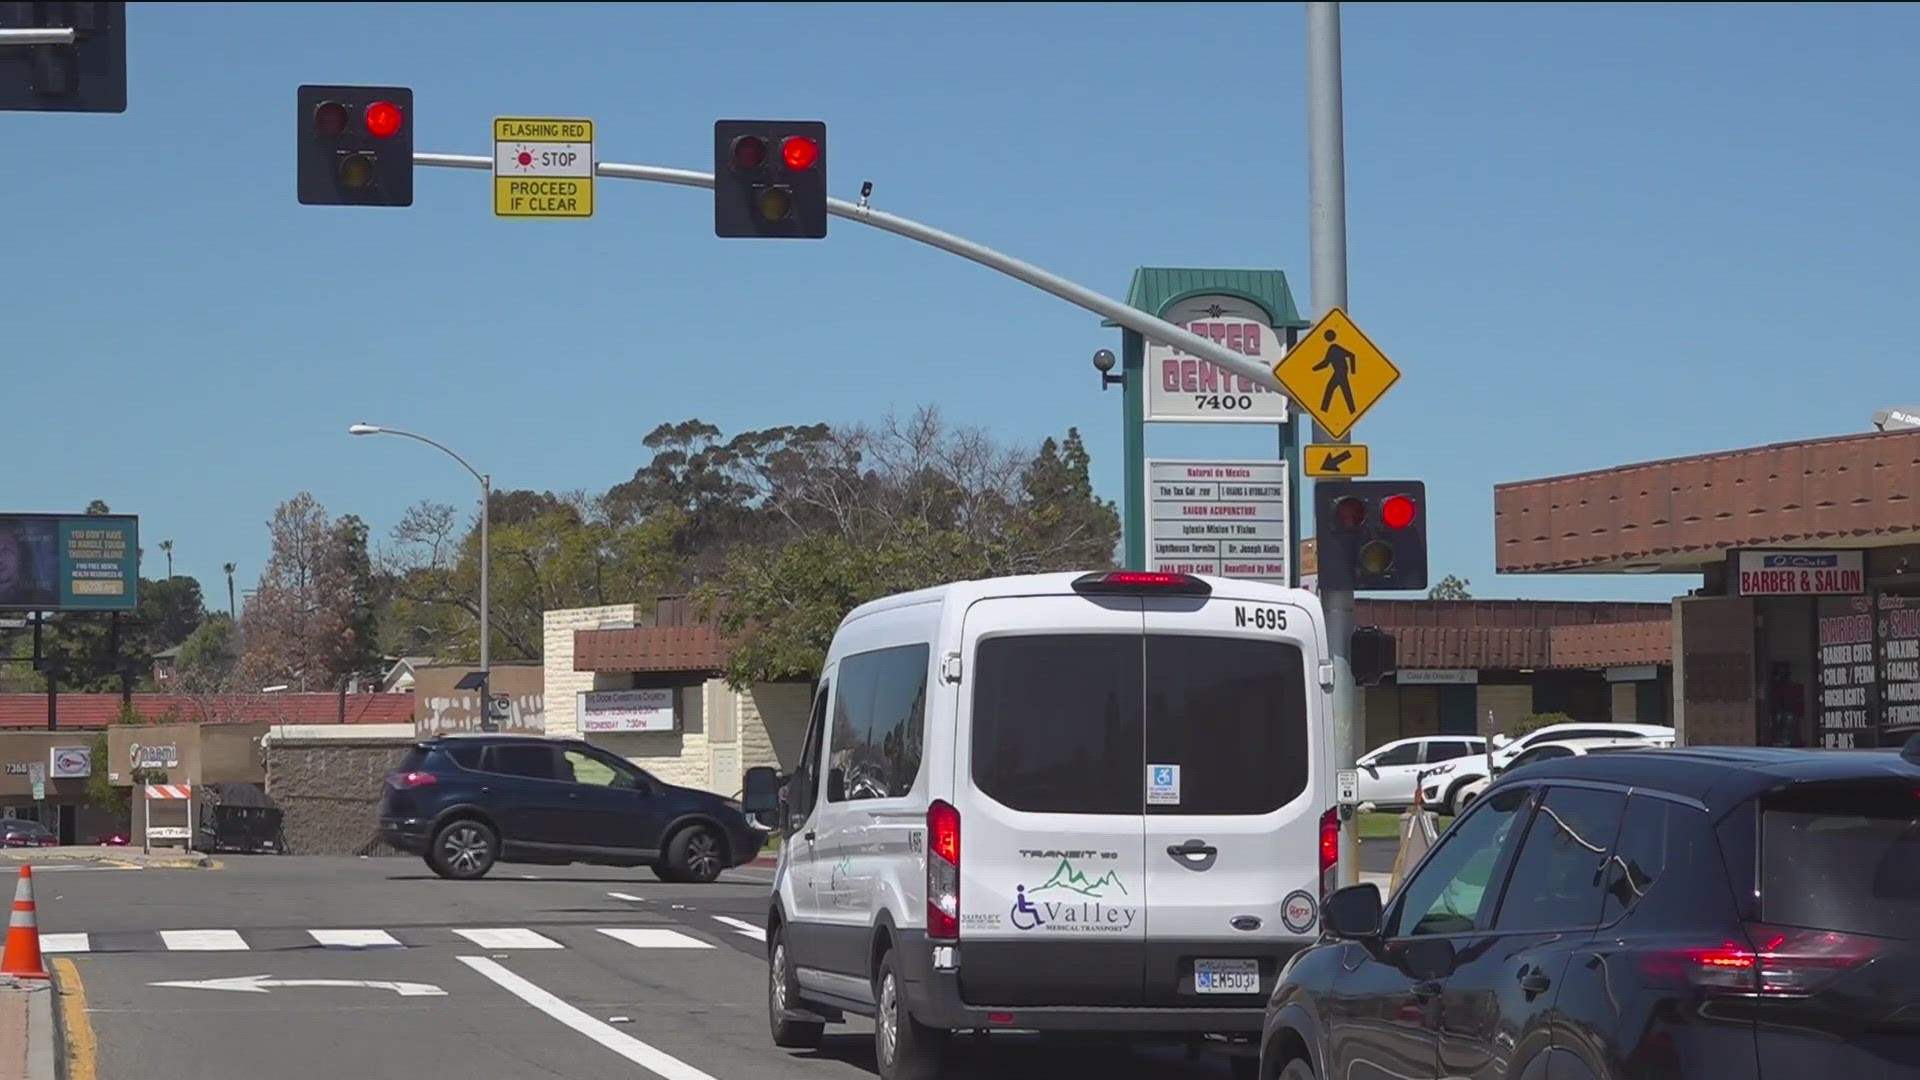 City of La Mesa installed $440K pedestrian crossing to improve safety.